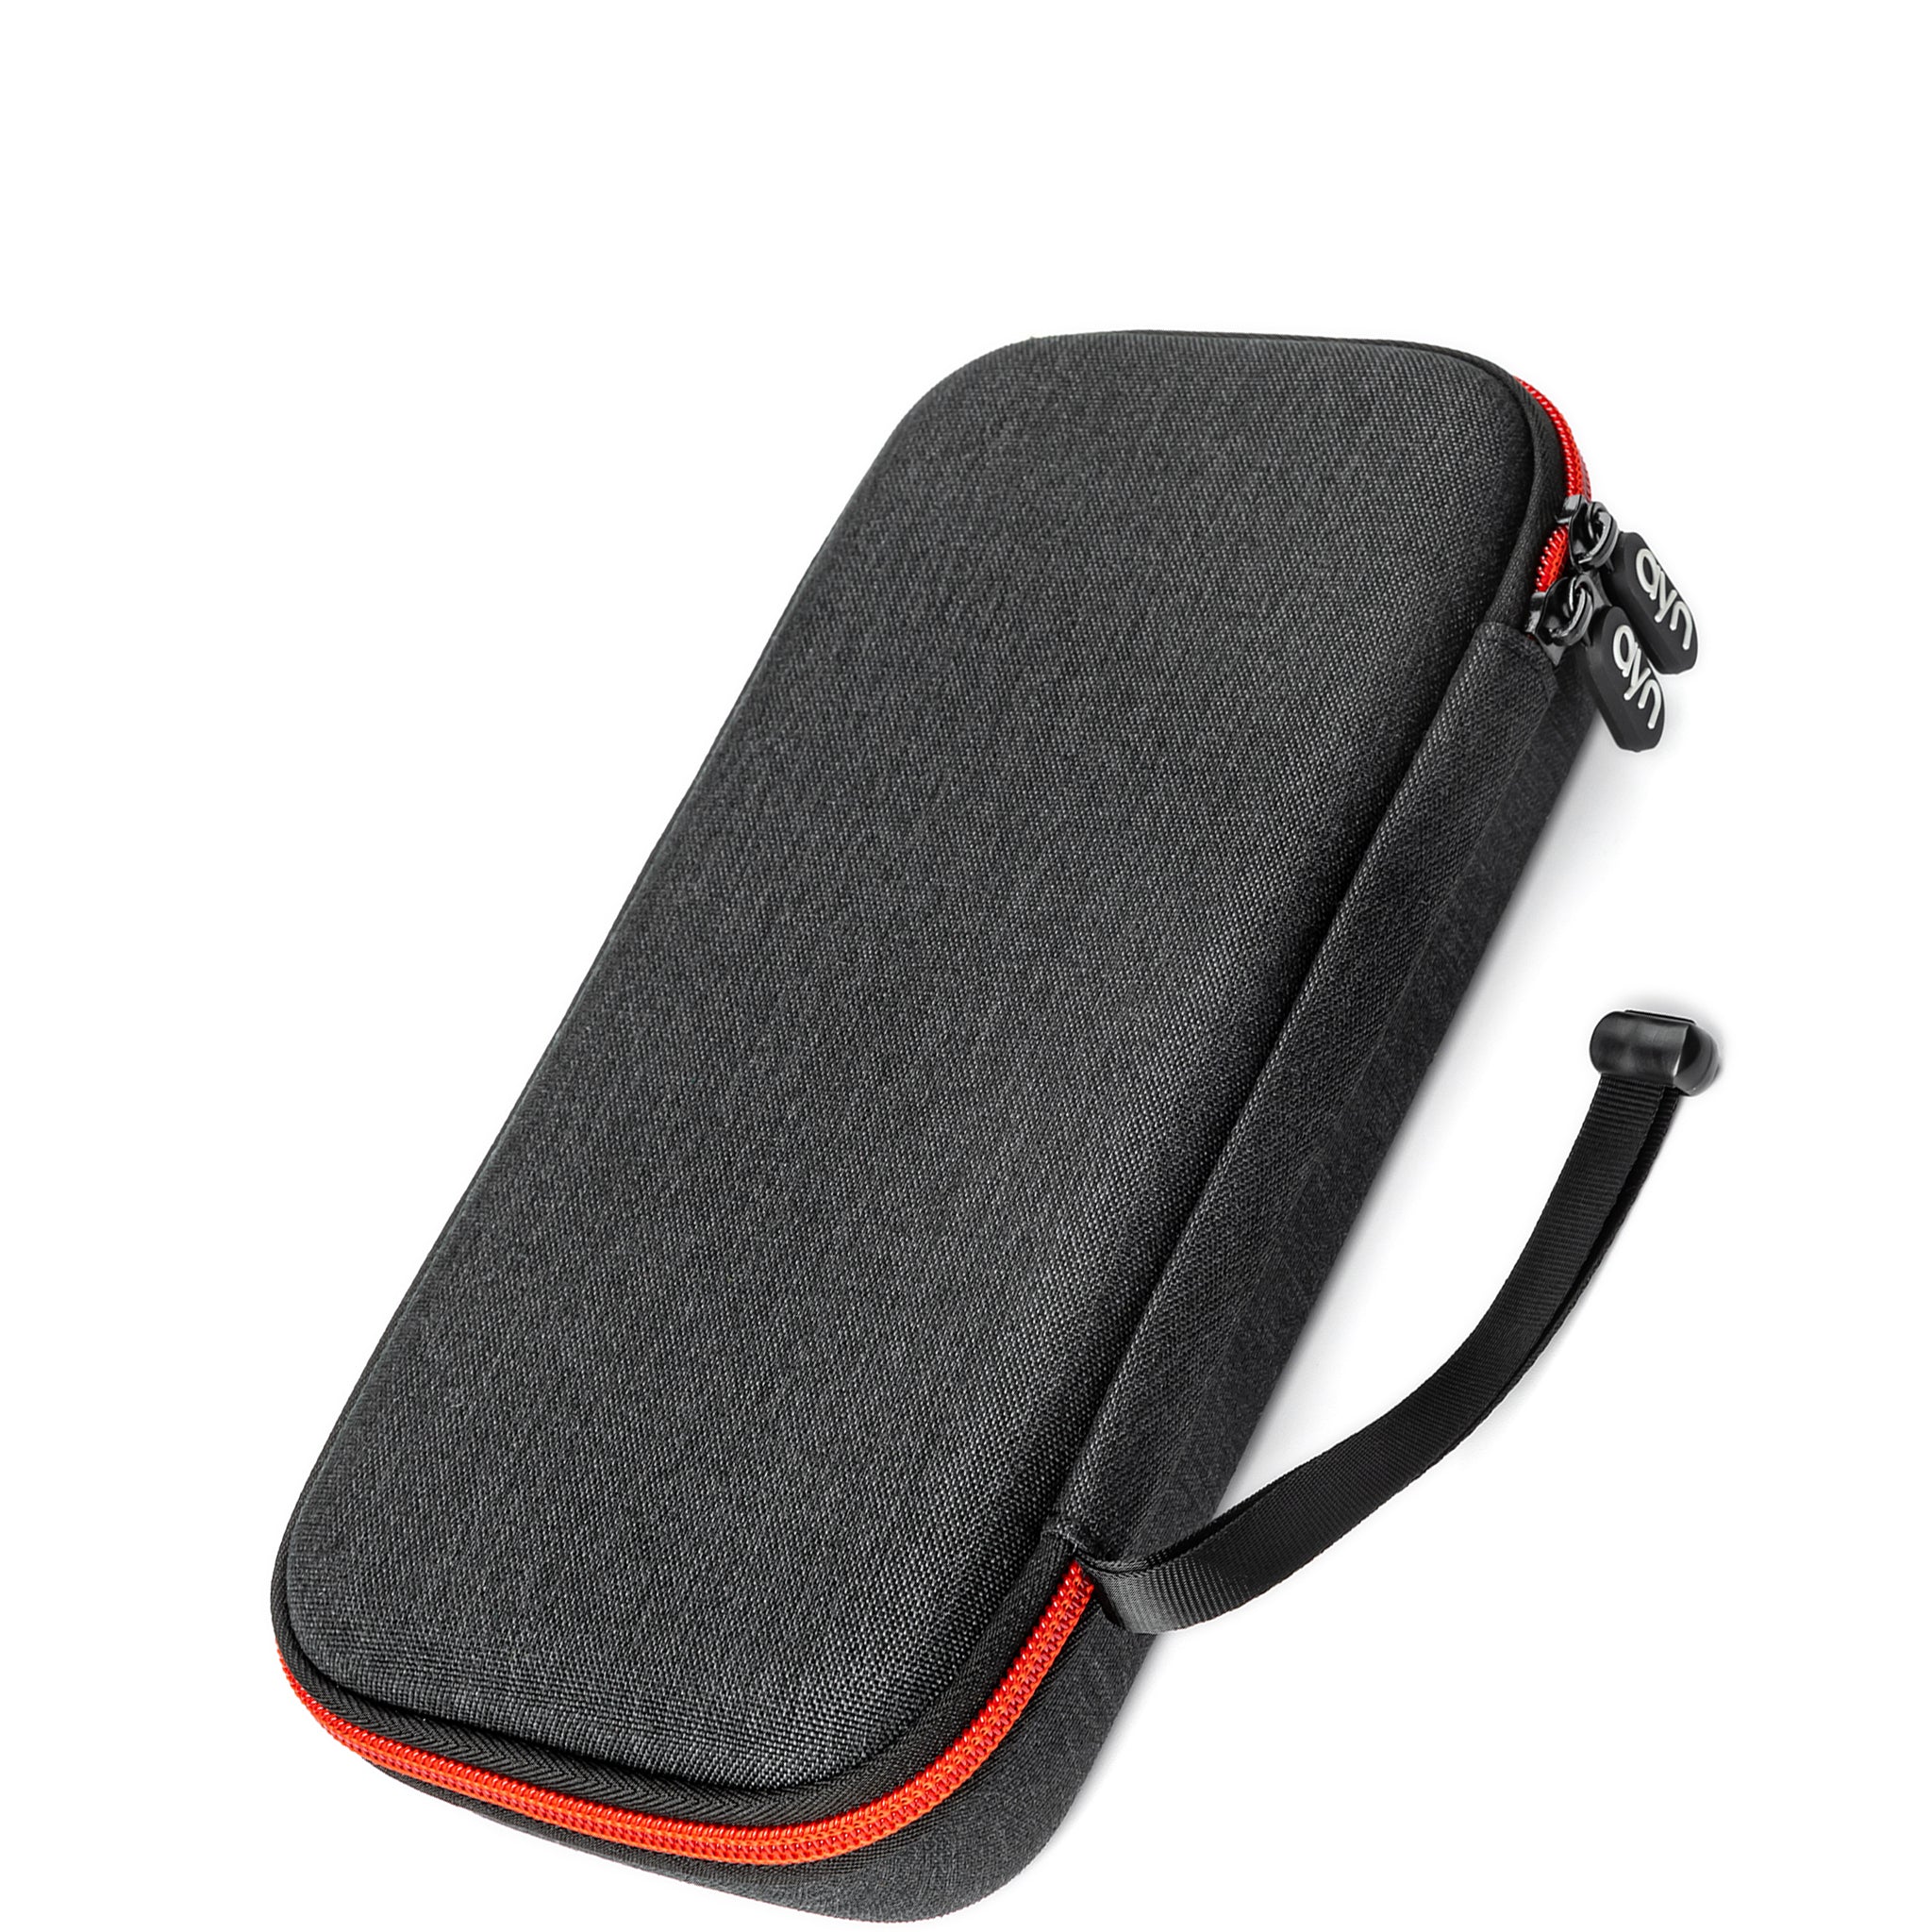 Carrying Case – AYN